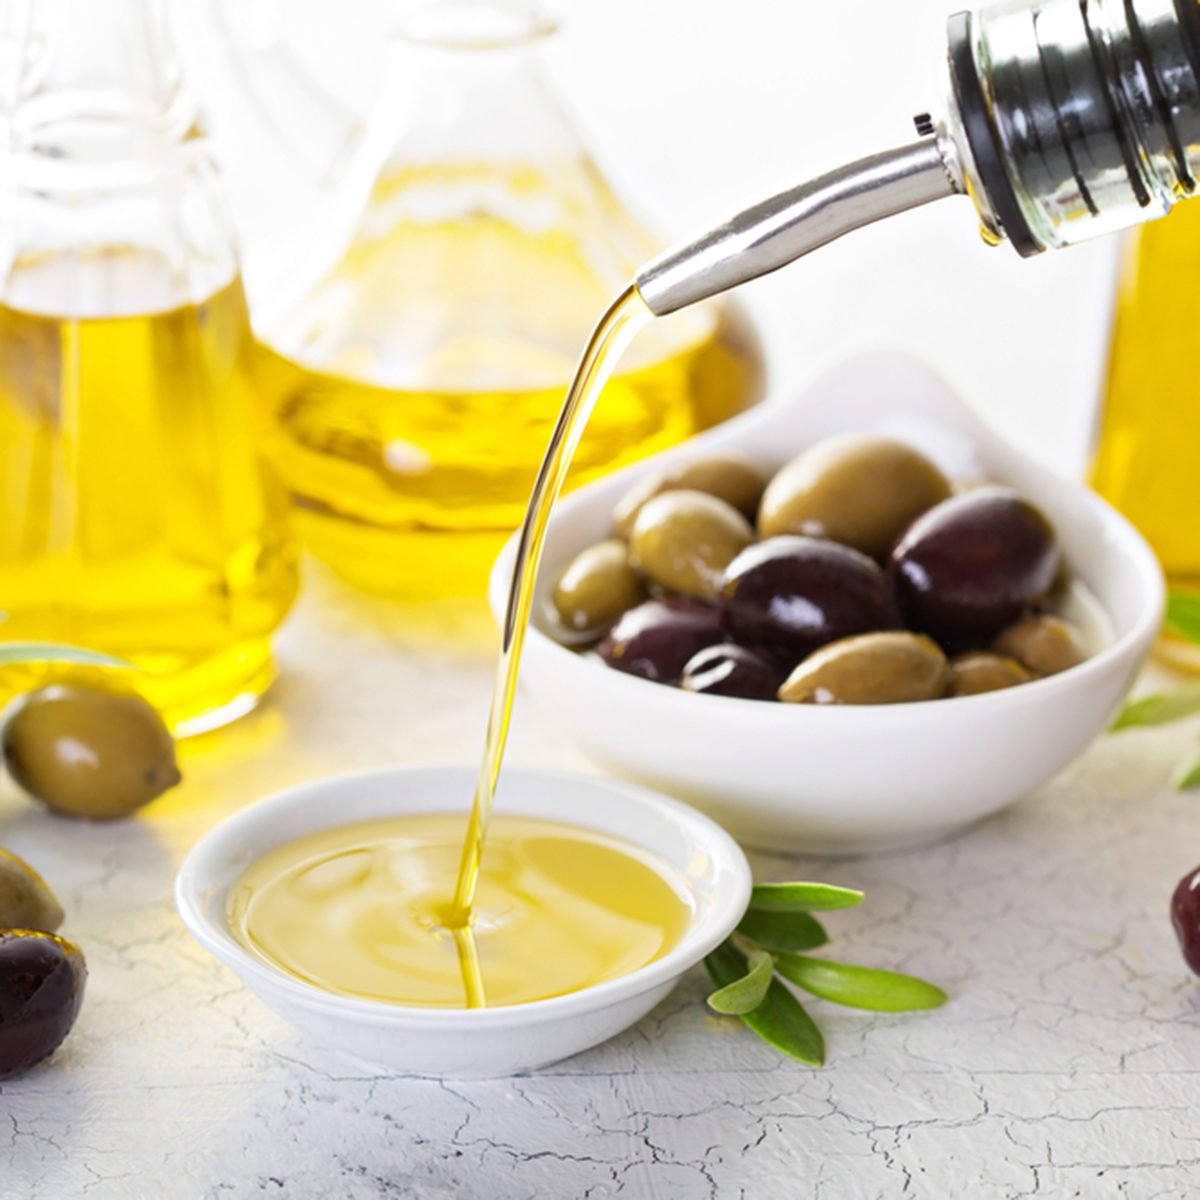 10 Olive Oil Benefits for Your Skin, Hair and Health